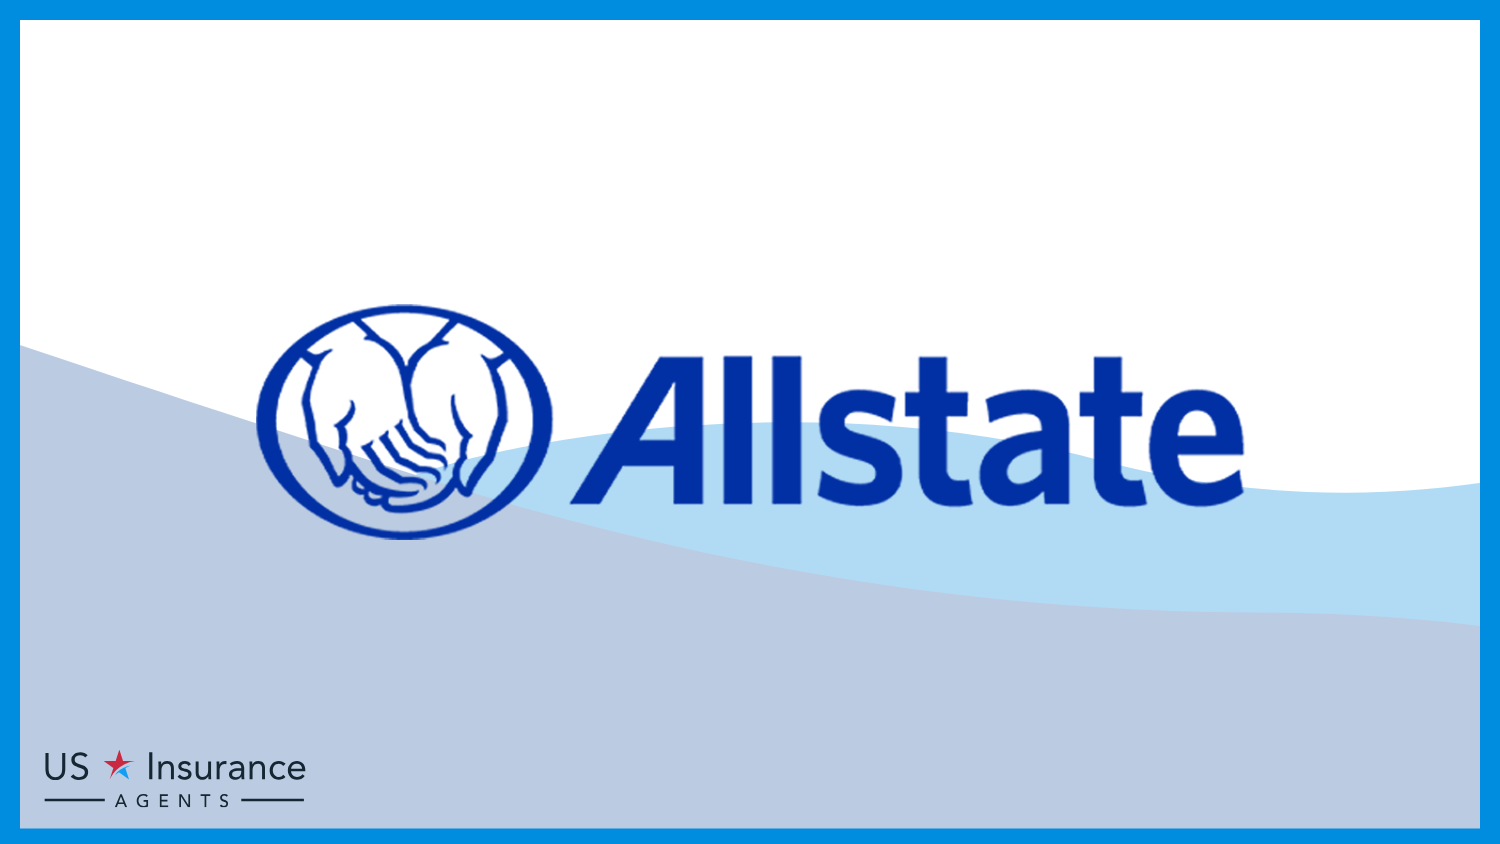 Allstate: Best Business Insurance for Axe-Throwing Companies